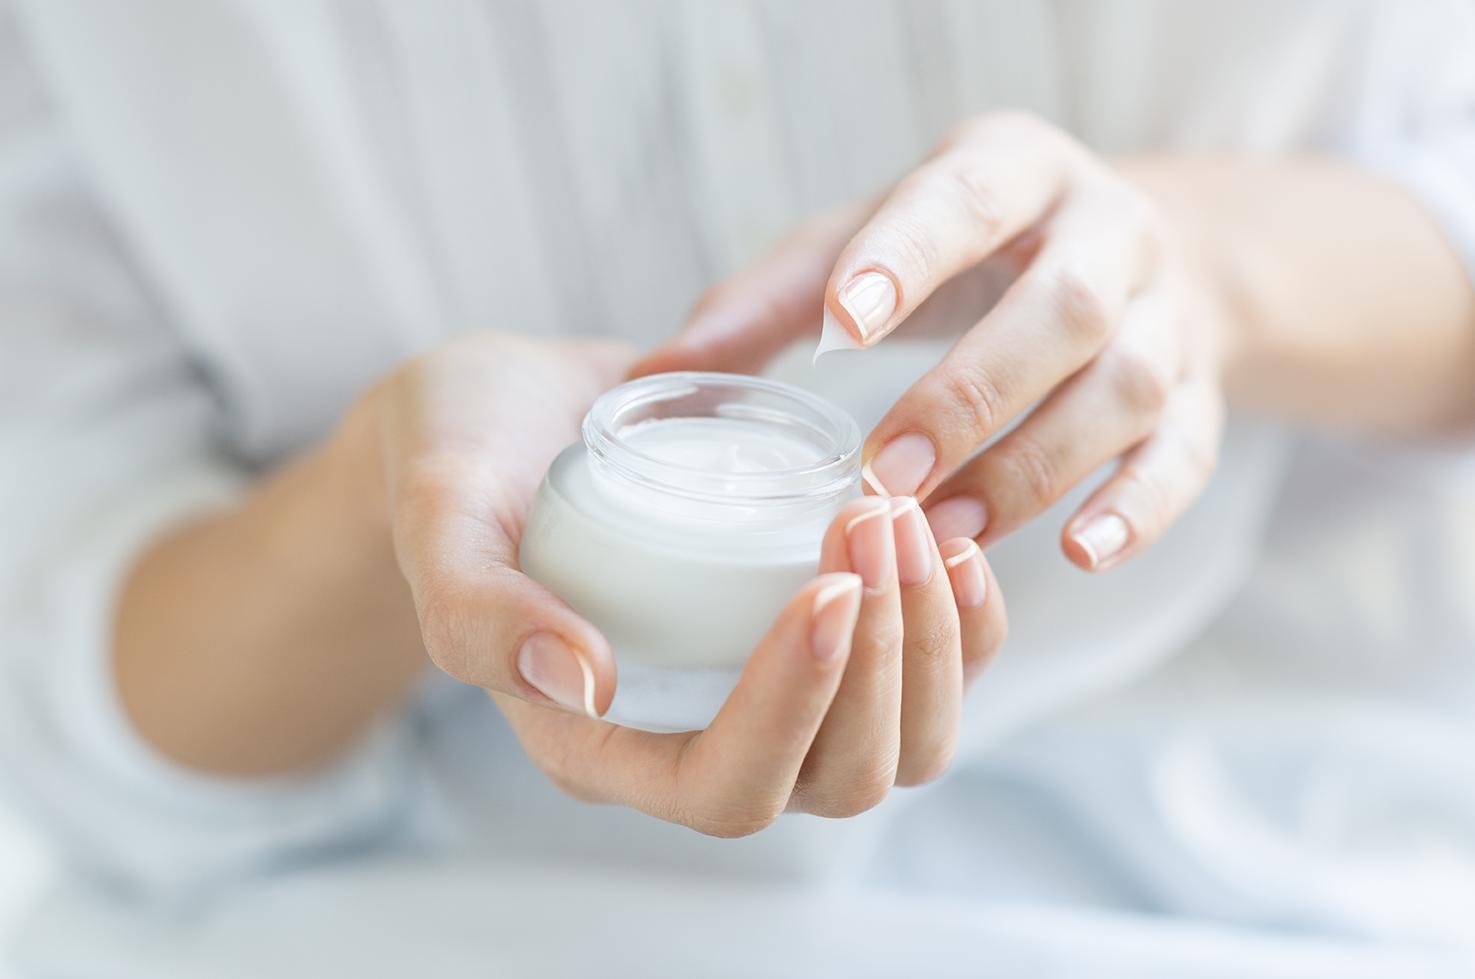 Image of a person holding creme